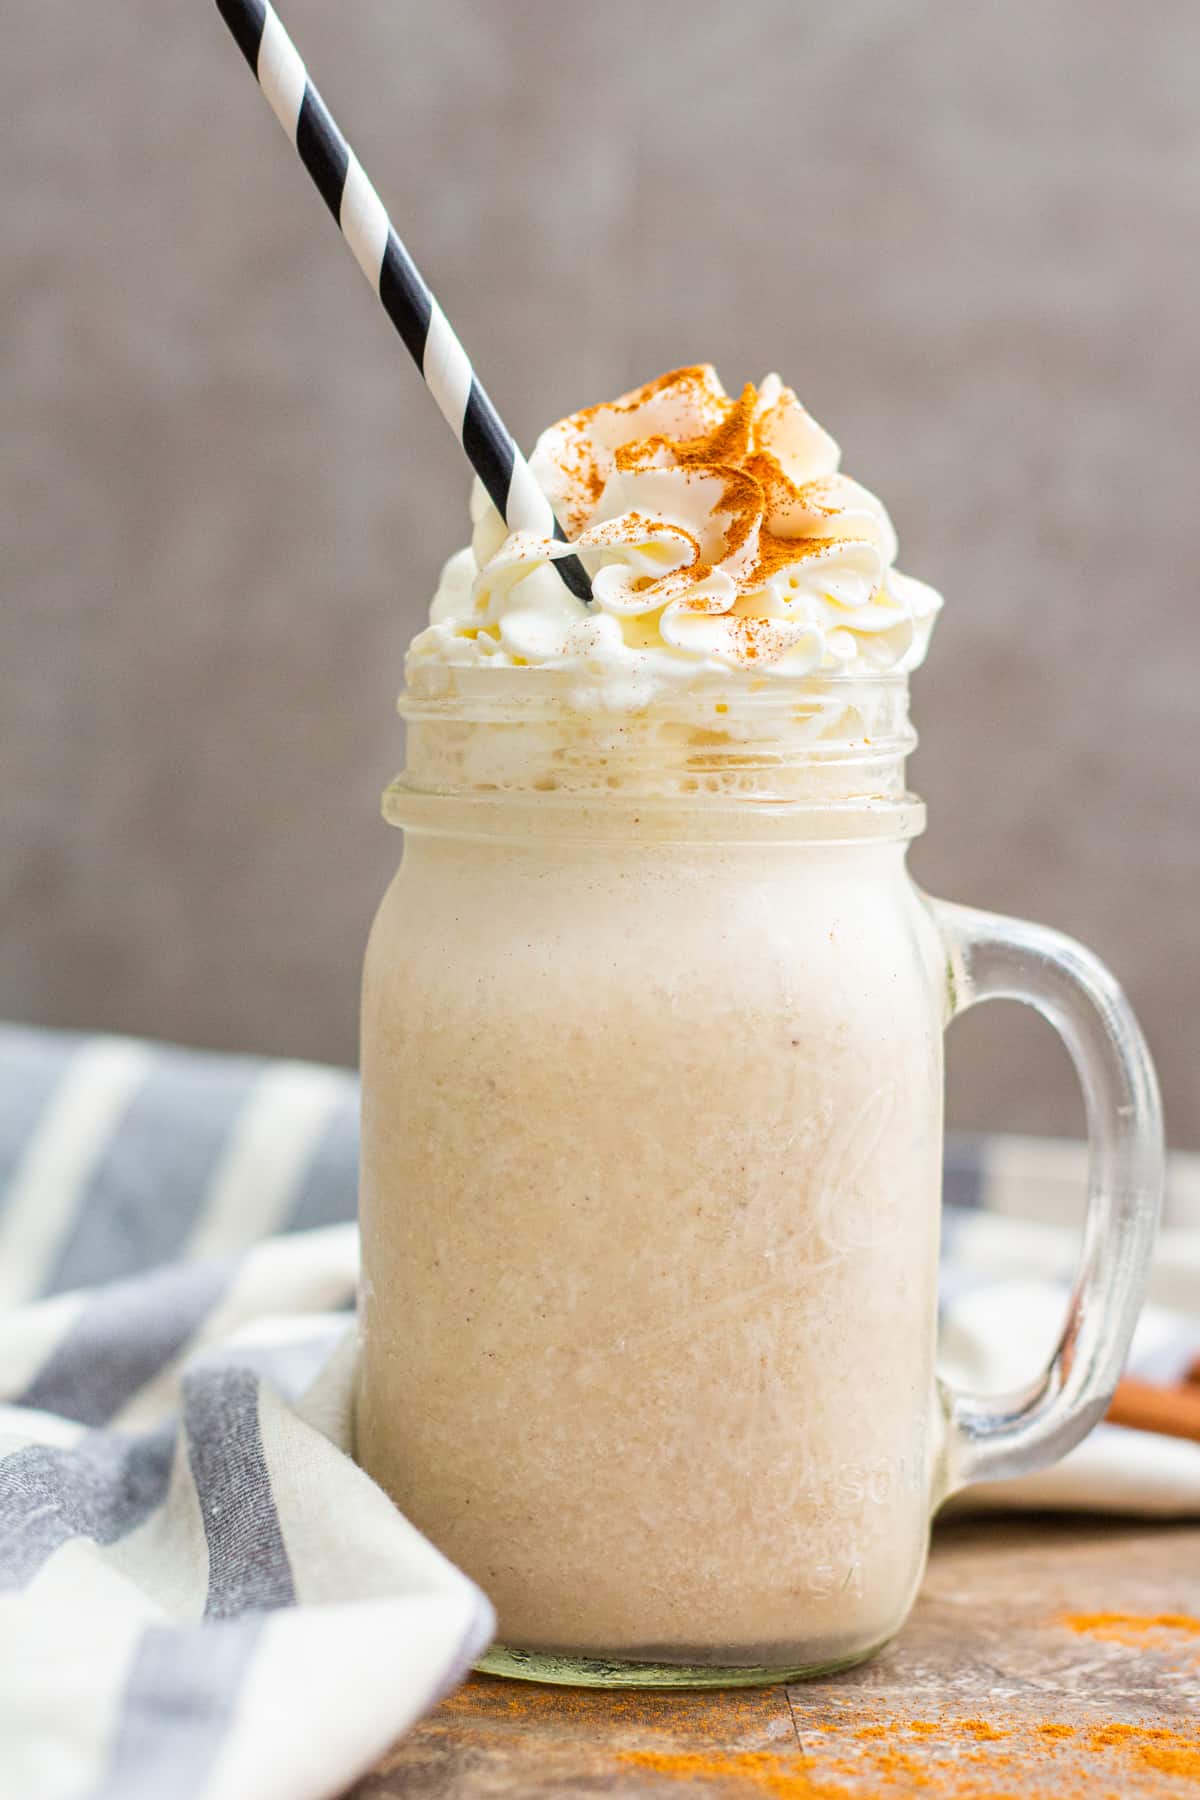 Your search for the best banana milkshake ends right here. This delicious and creamy banana milkshake recipe is a keeper and is perfect for any day of the year!